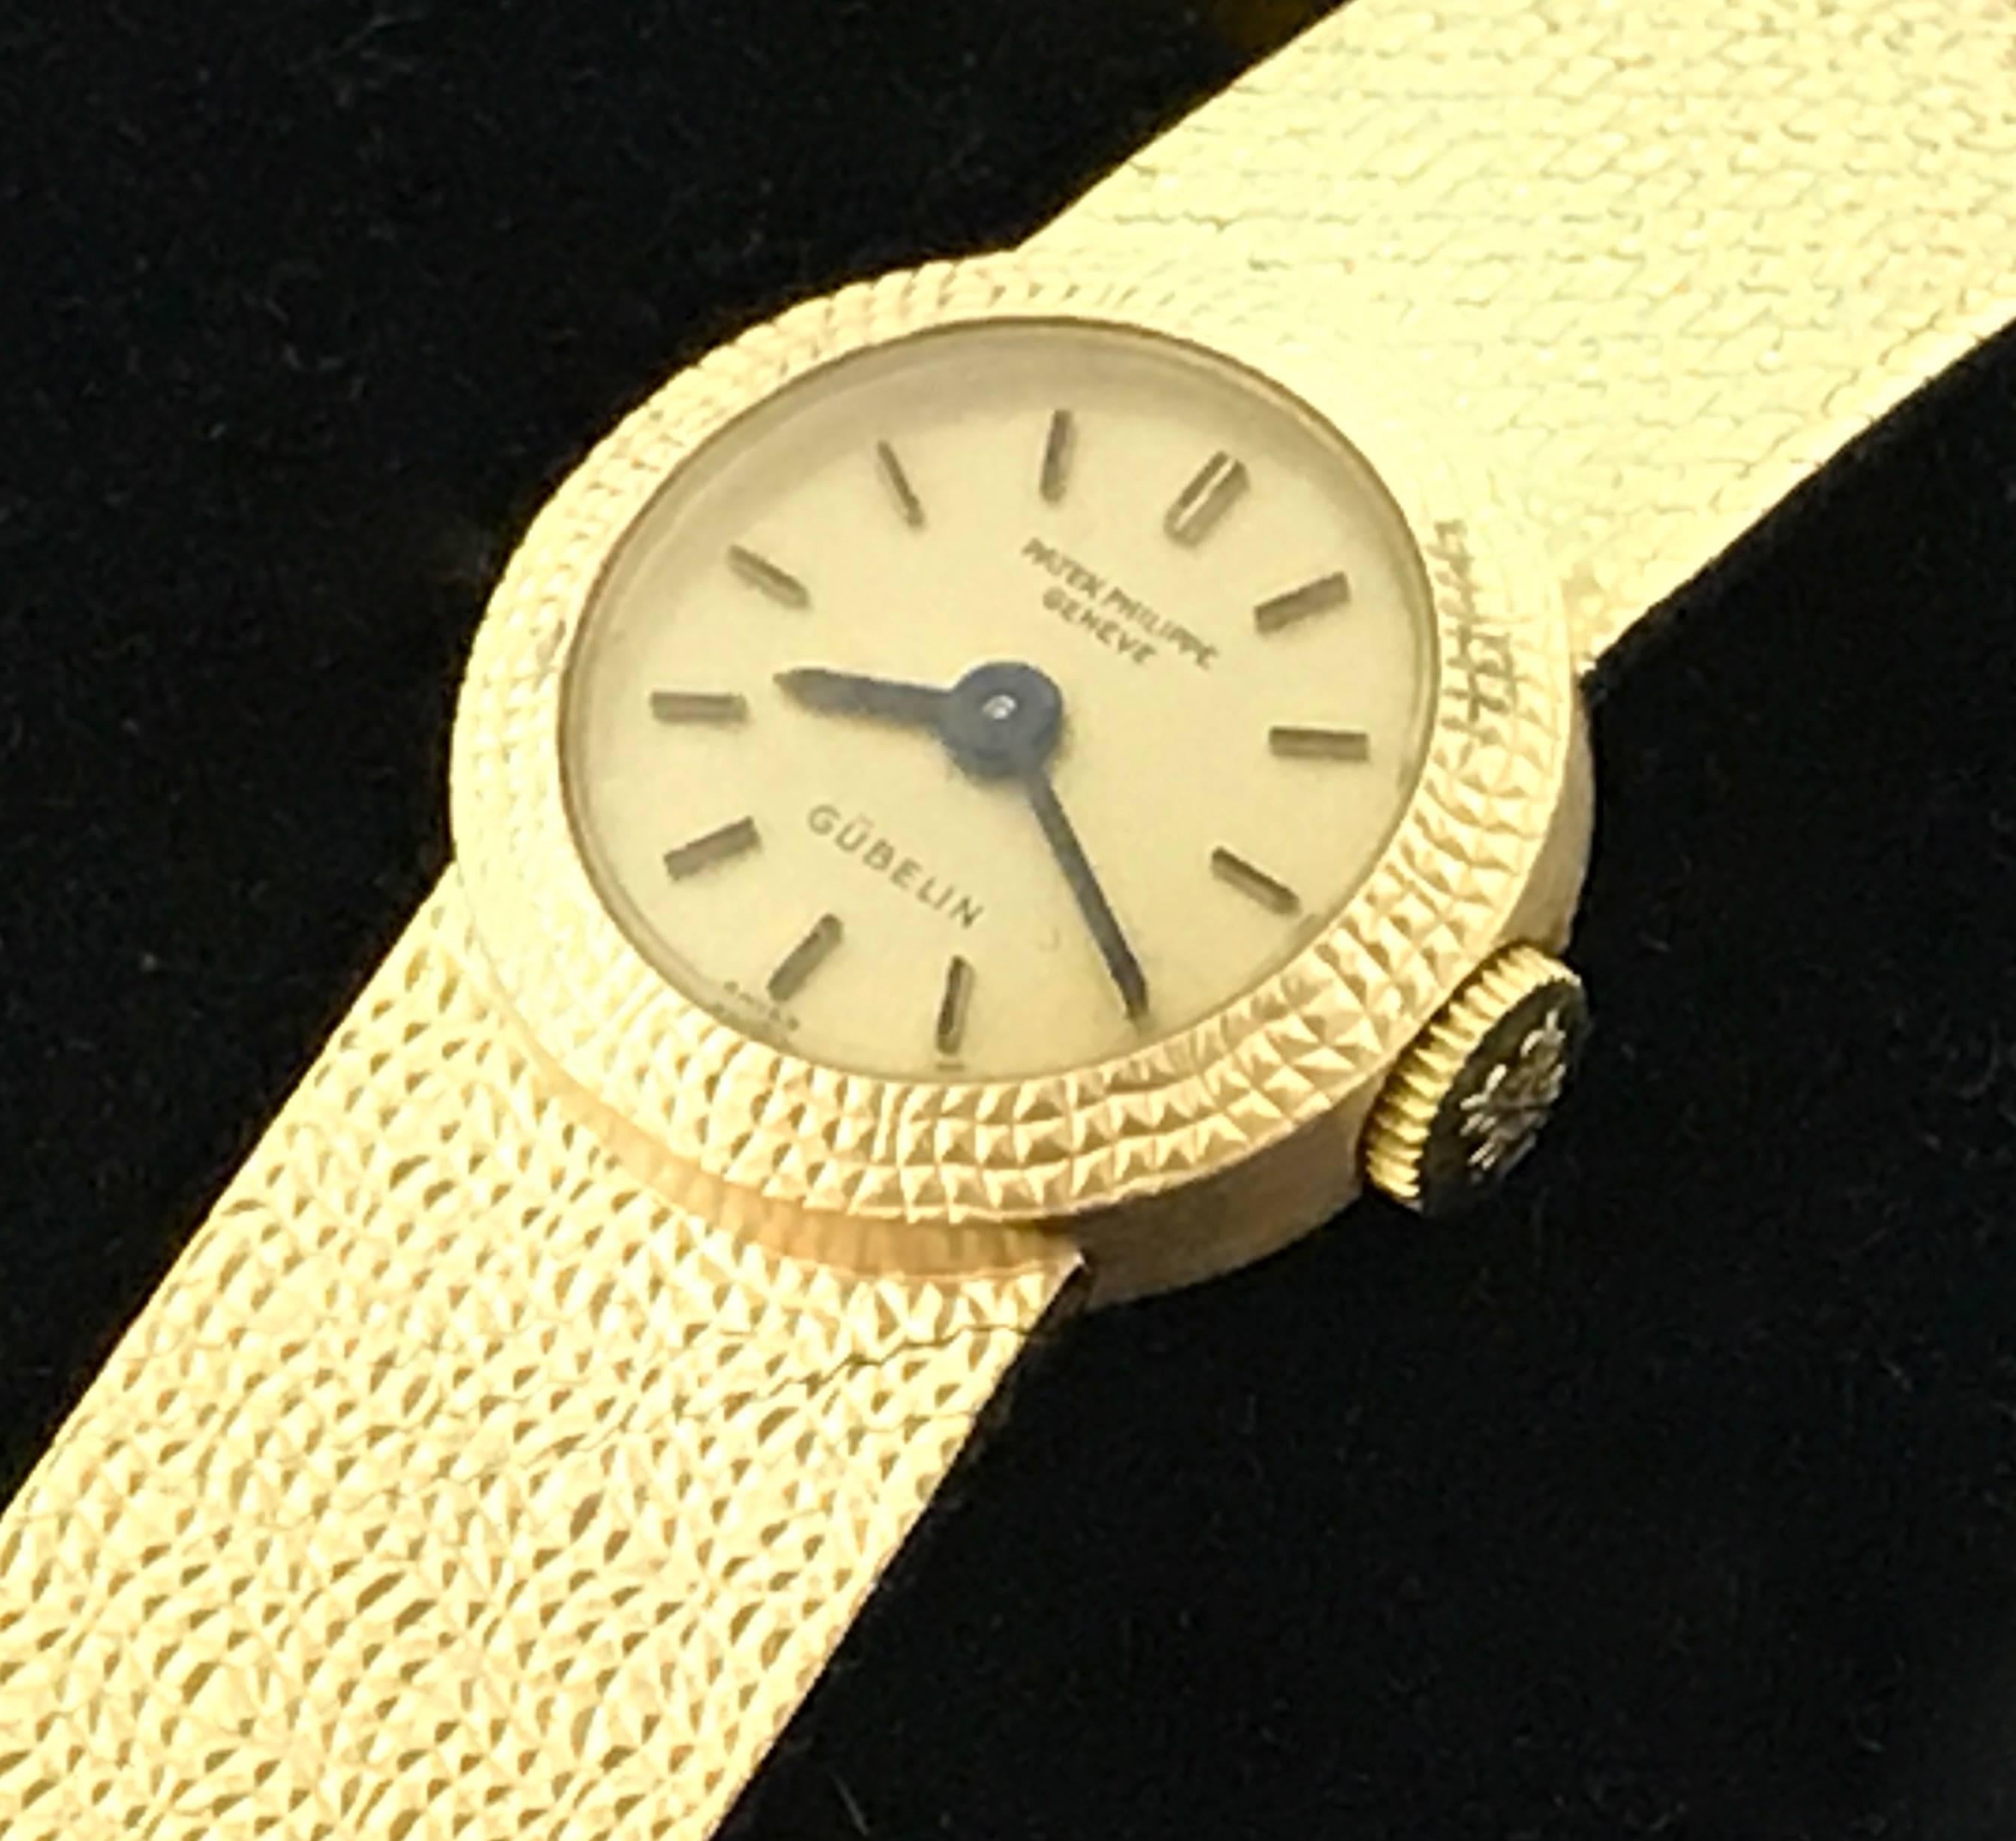 Patek Philippe Ladies 3306 Wrist Watch in 18K Yellow Gold. This is an heirloom piece you can pass down for generations.  This timepiece features an 18K Yellow Gold round case measuring 17mm in diameter.  Movement is a manual winding Patek Philippe